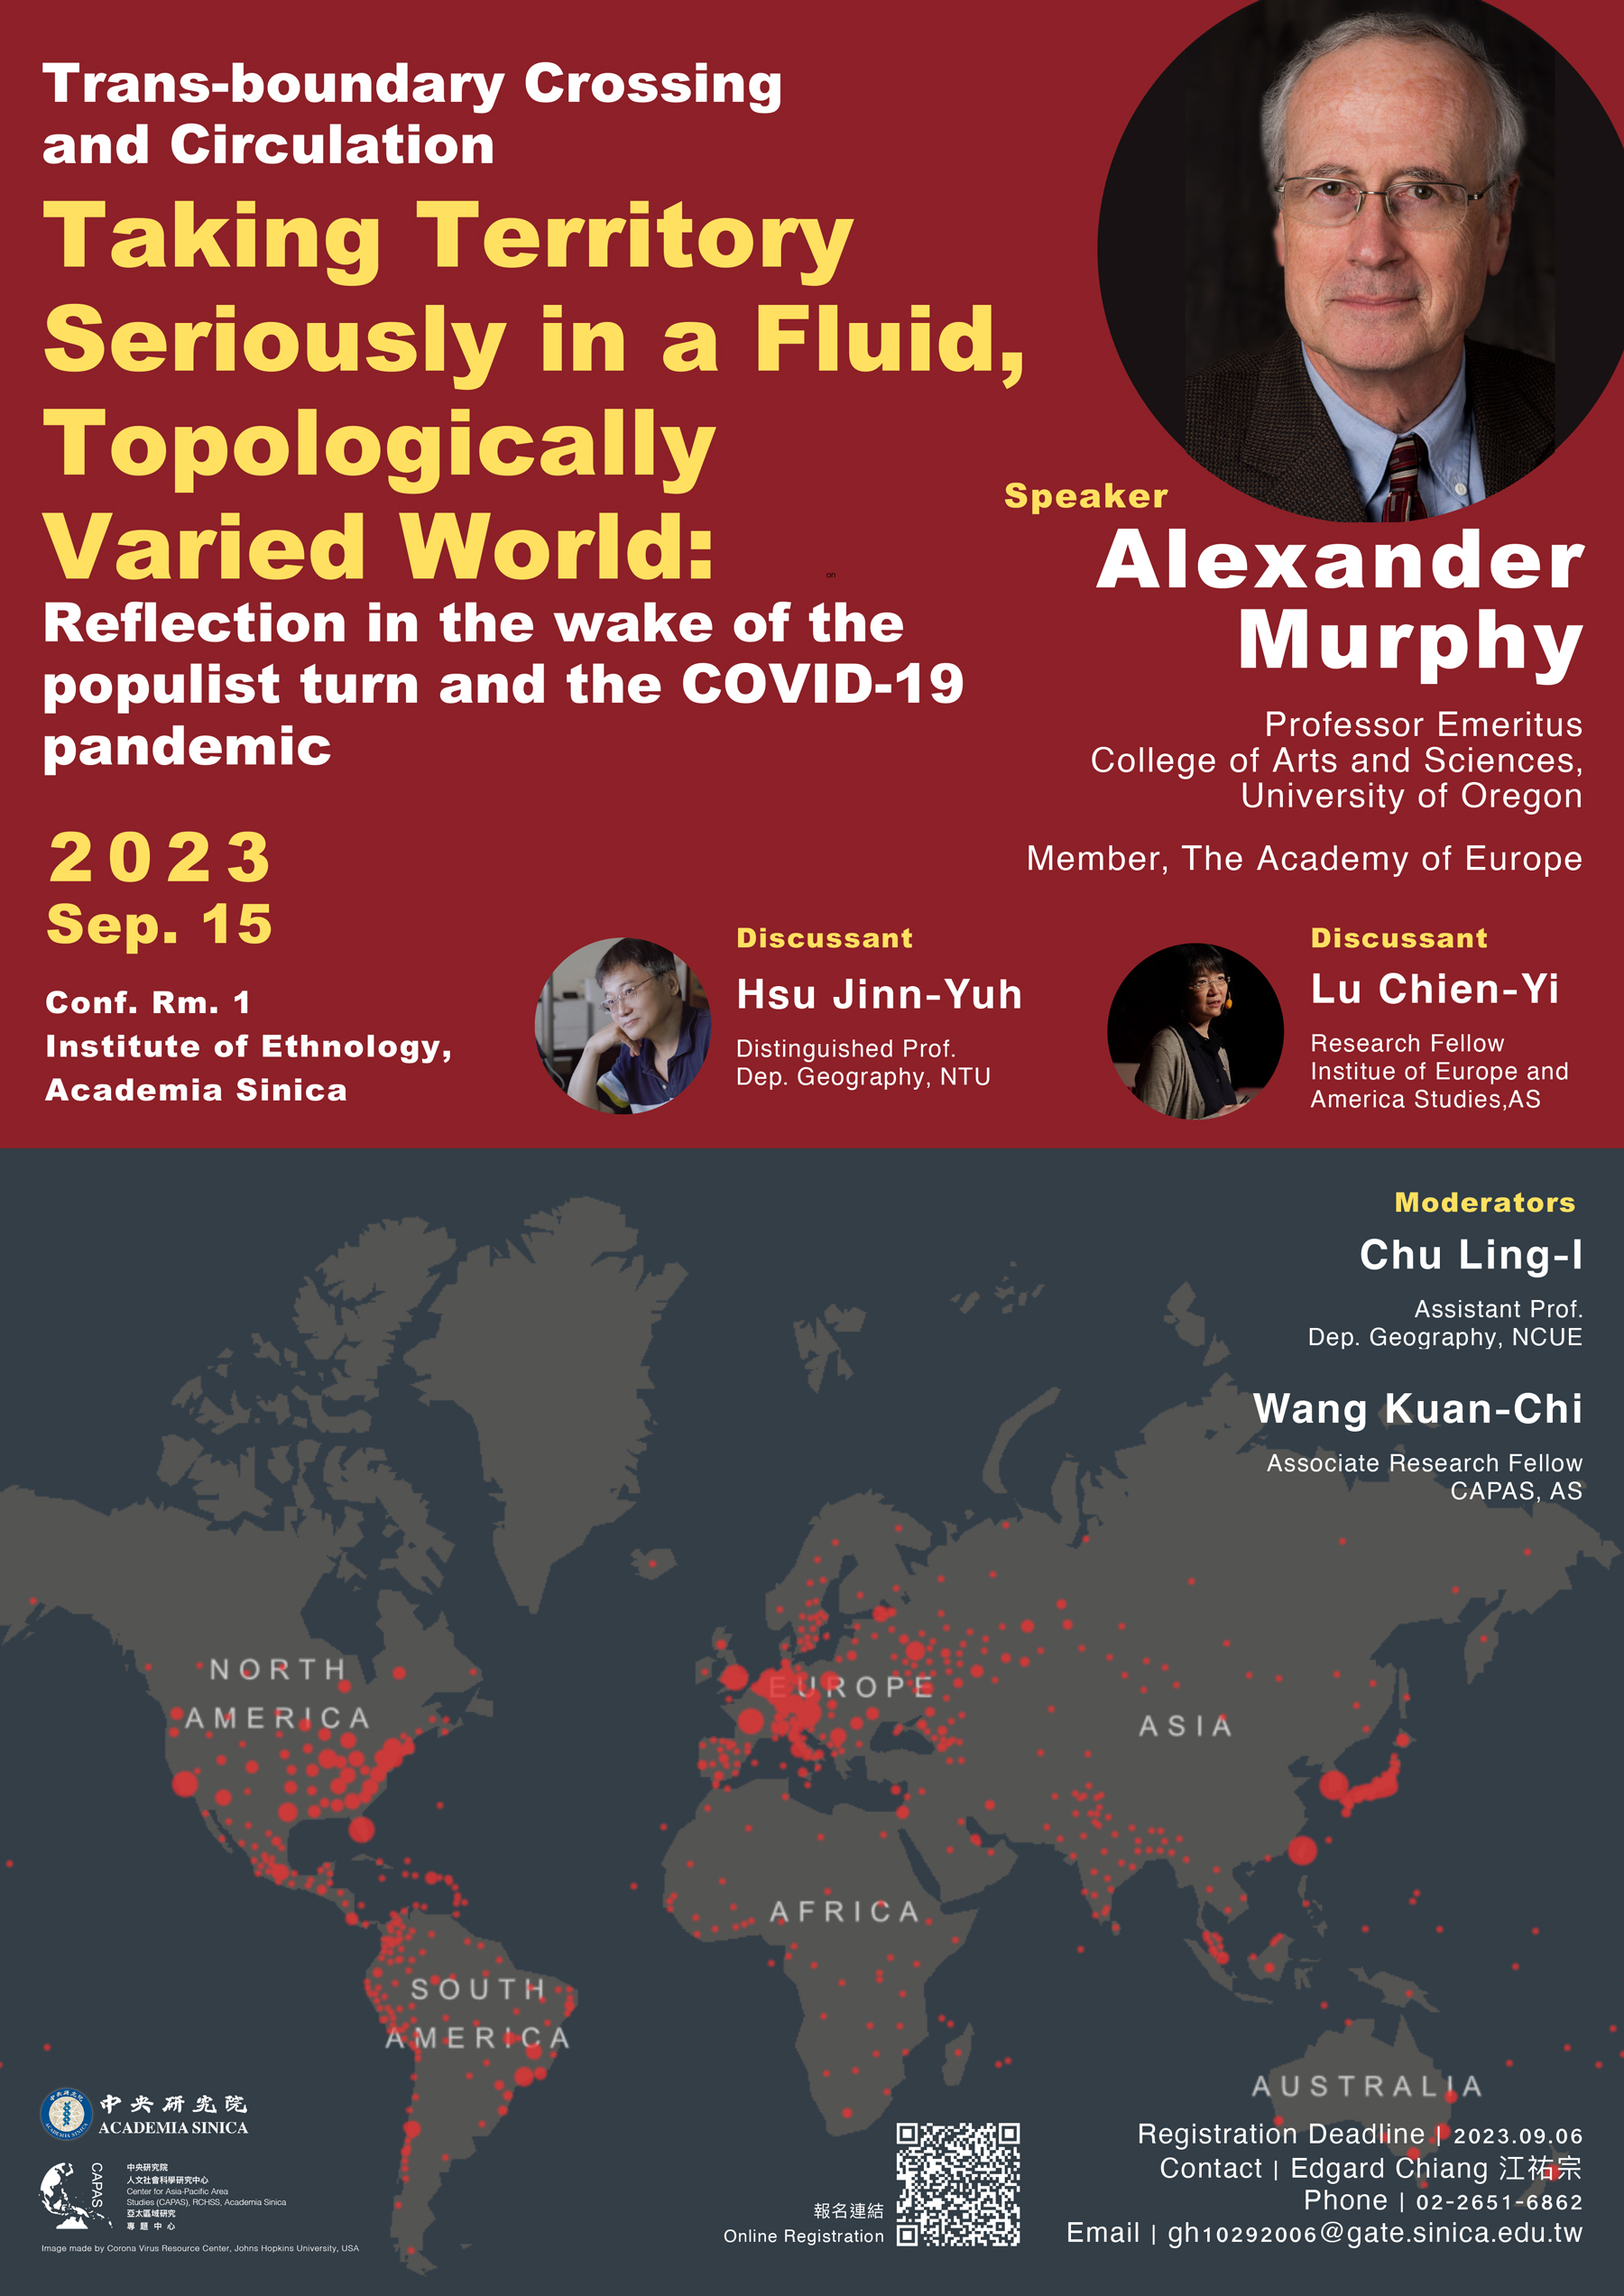 Special Lecture Series on Trans-boundary Crossing and Circulation: Dr. Alexander Murphy